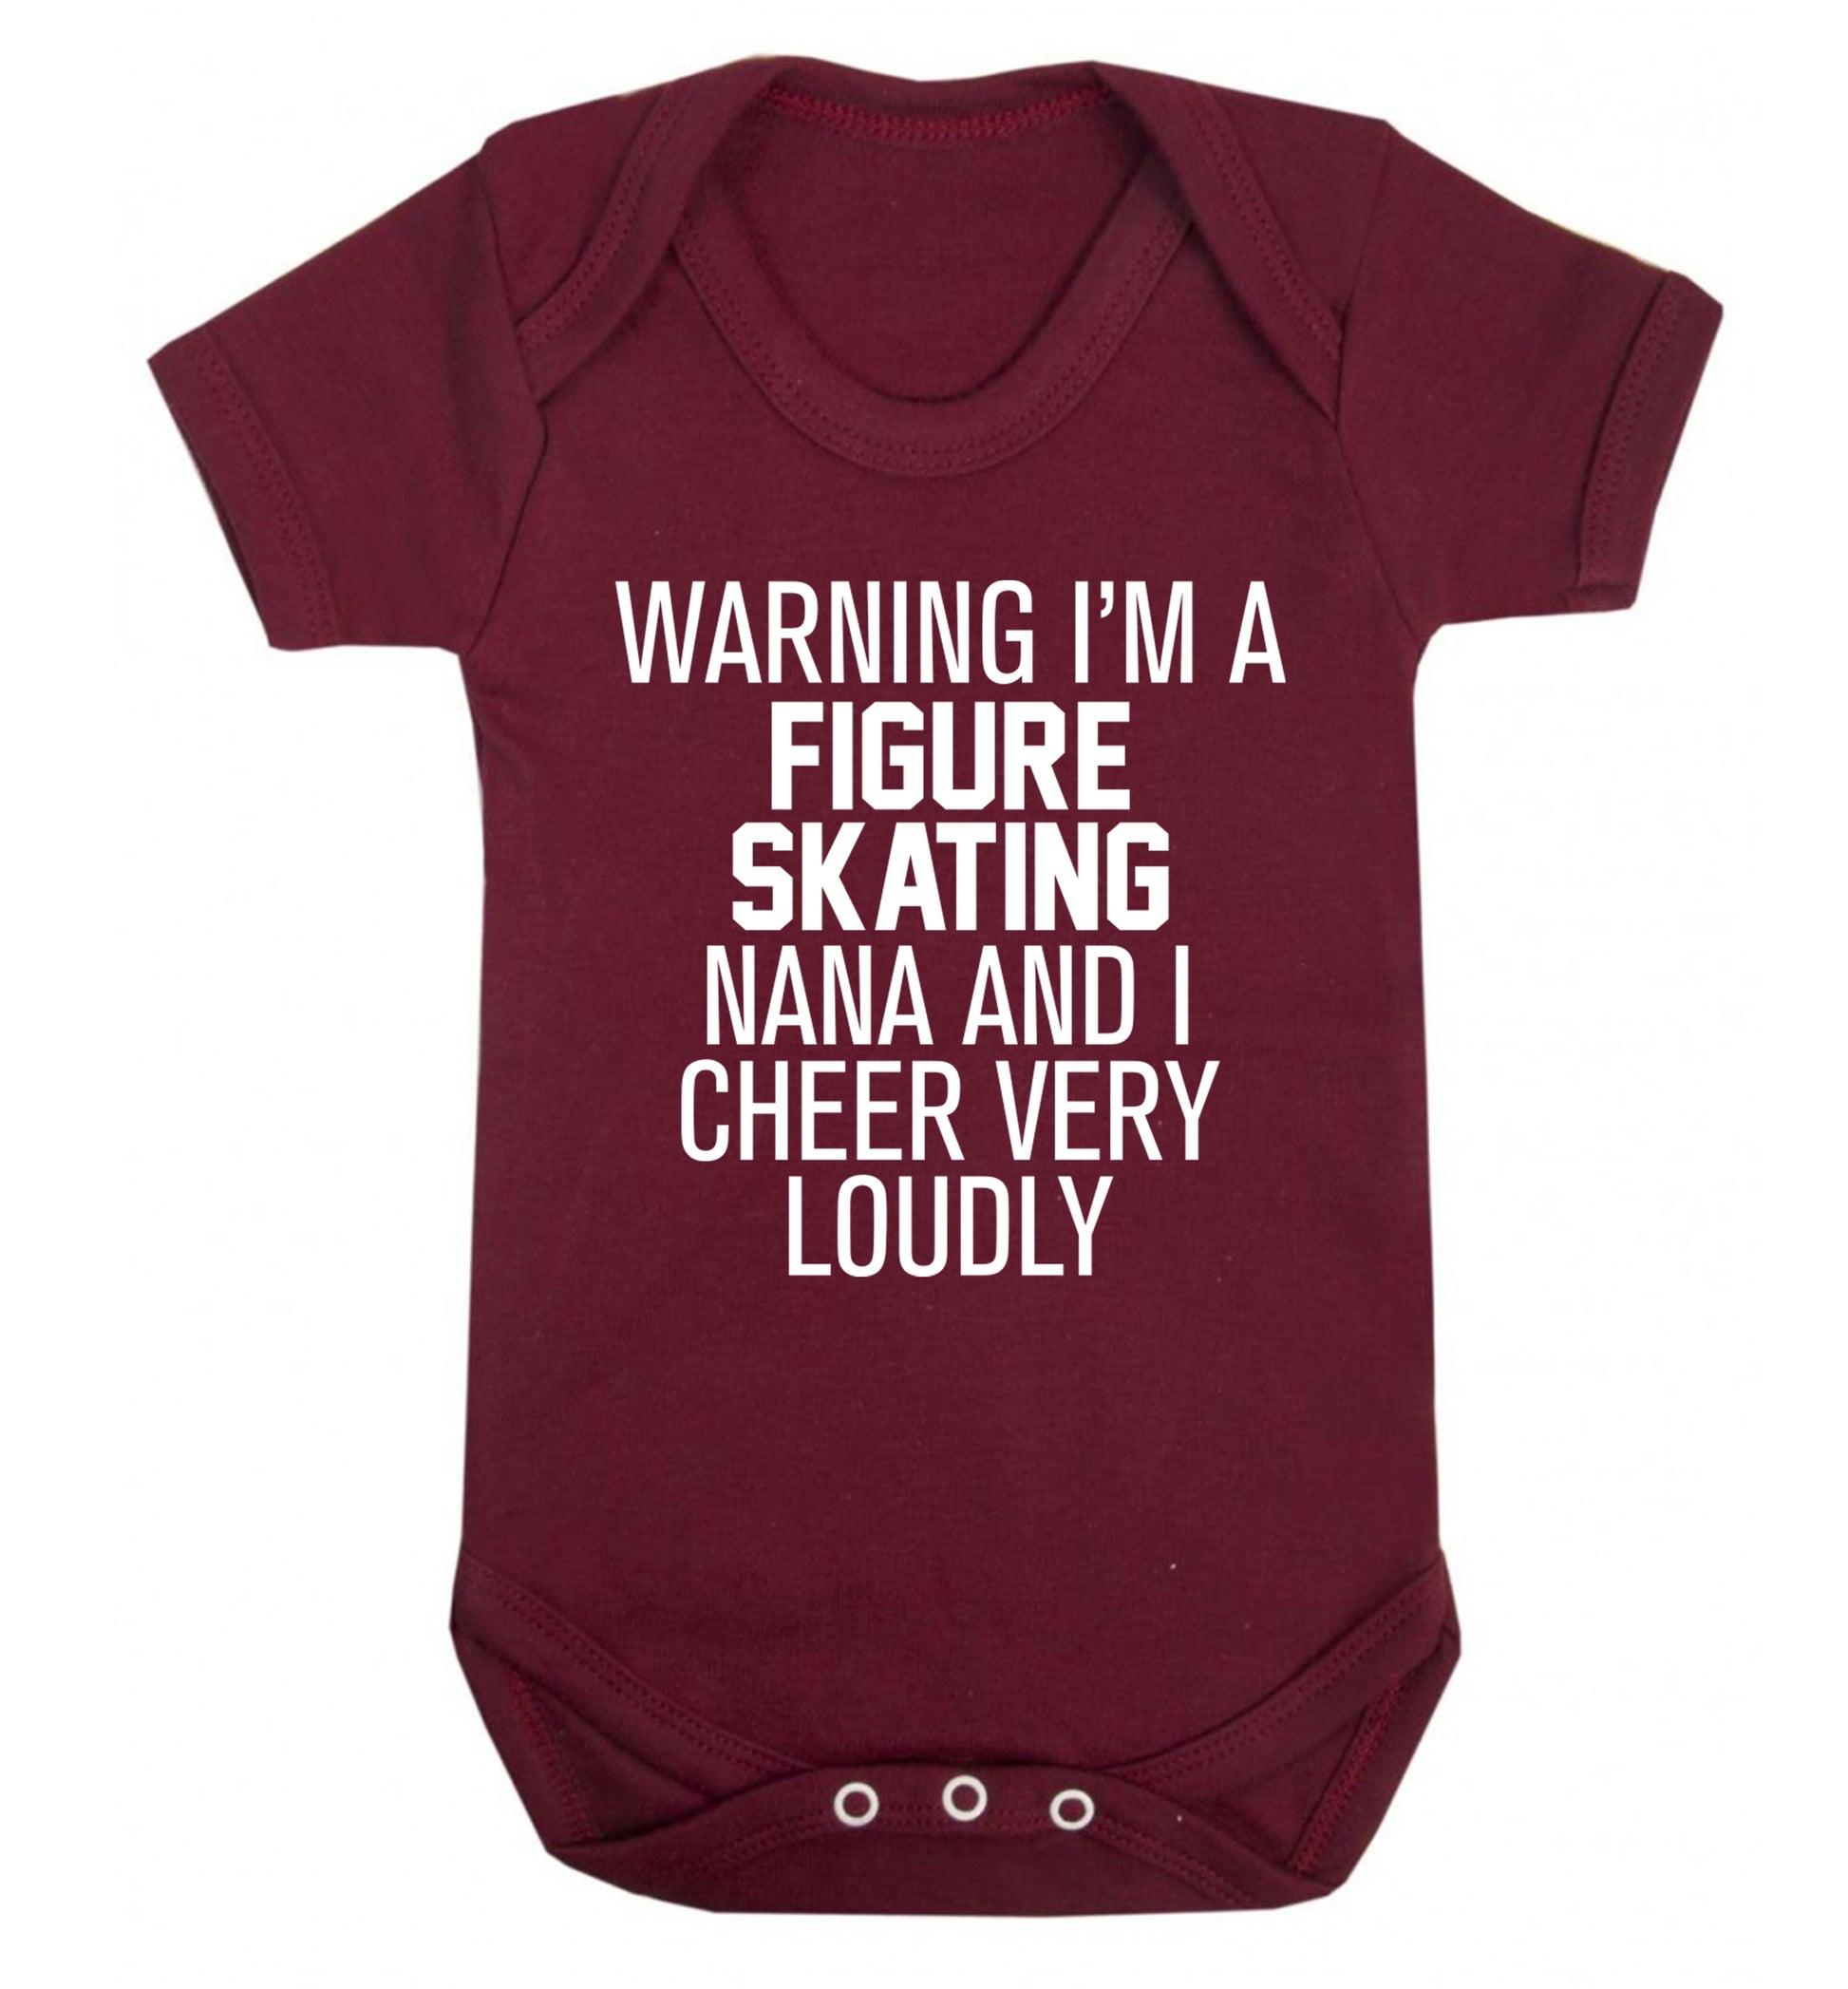 Warning I'm a figure skating nana and I cheer very loudly Baby Vest maroon 18-24 months